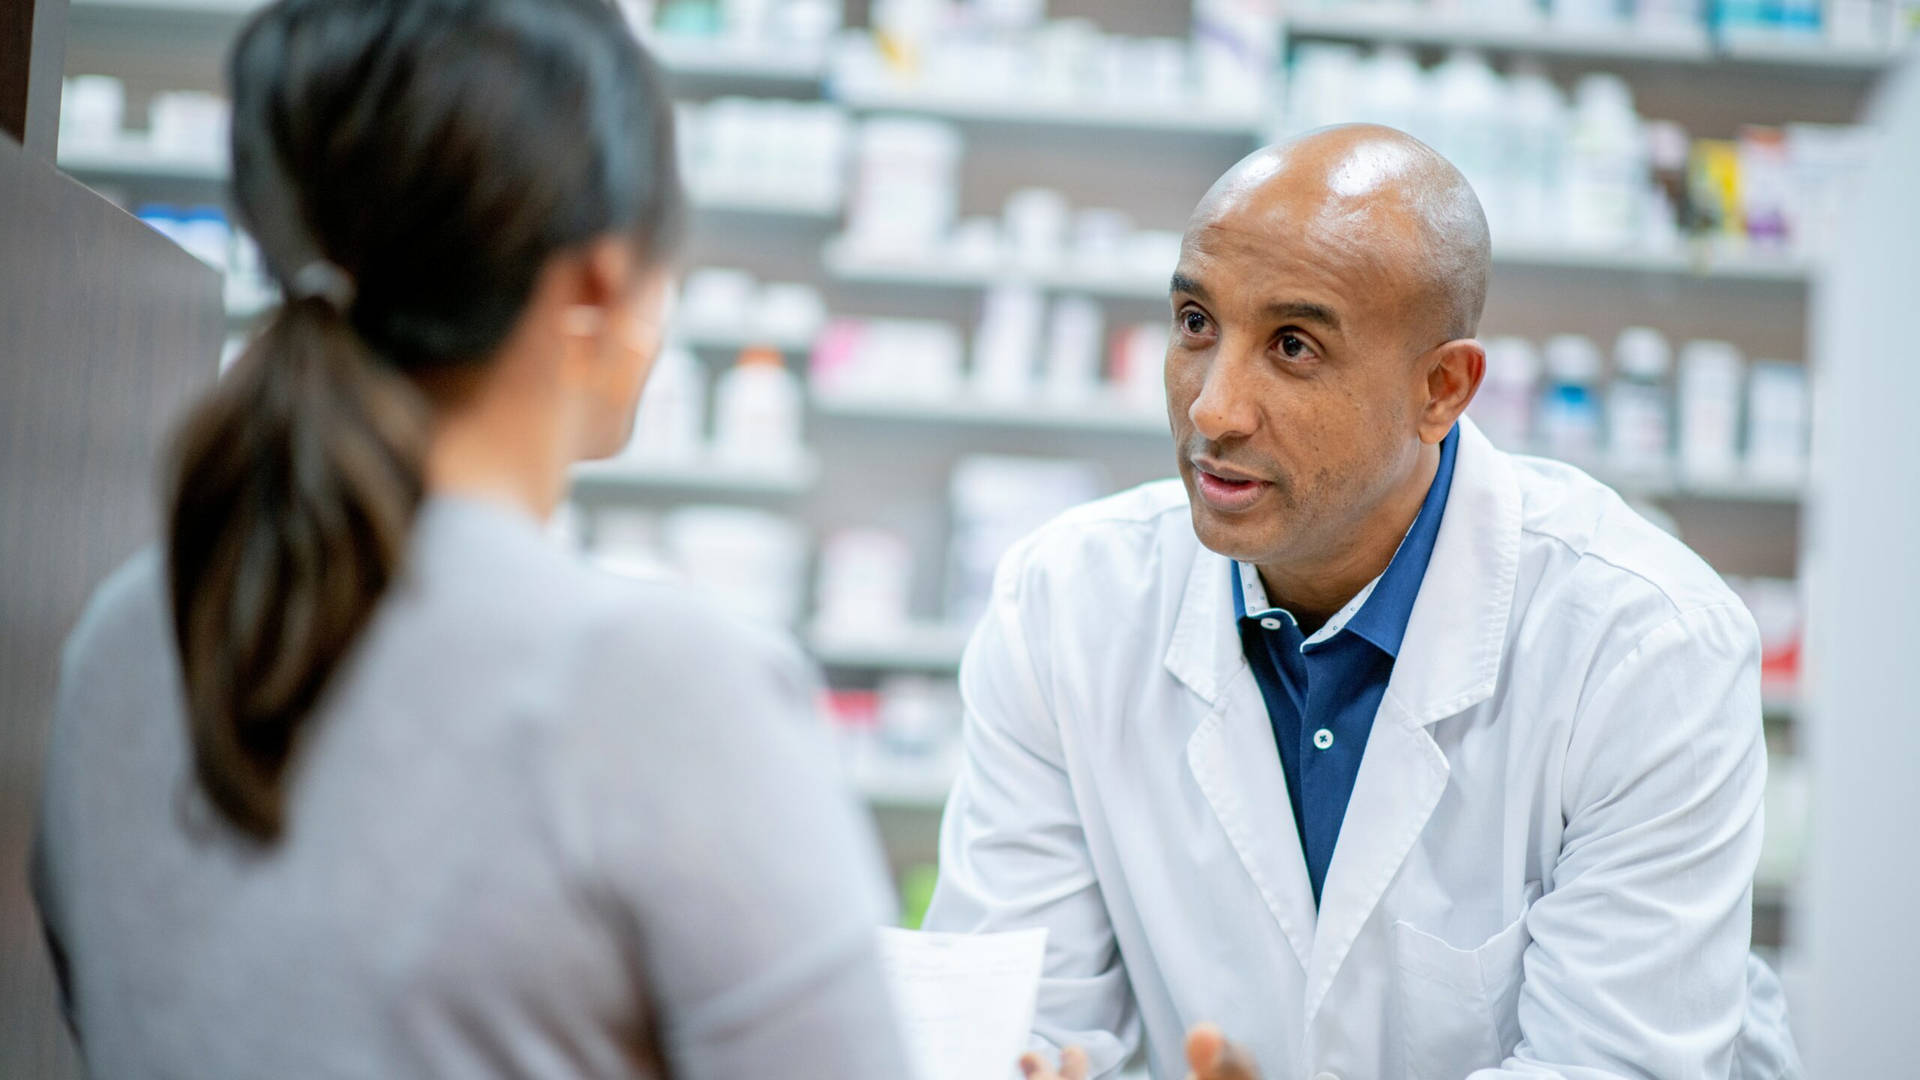 A Professional Pharmacist Consulting With A Customer Background